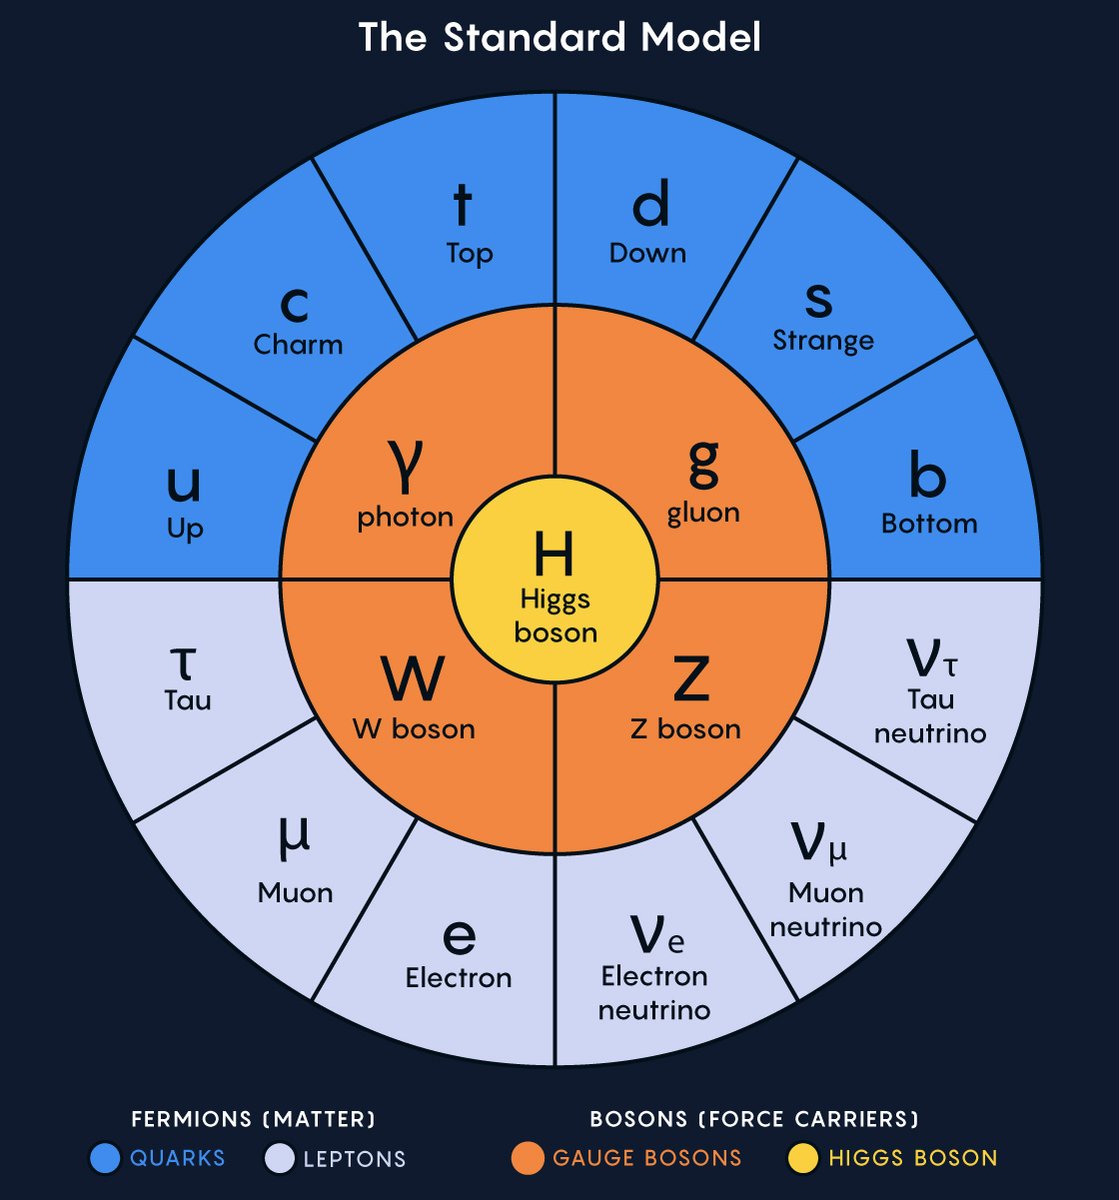 A visualization of the Standard Model created for the 2013 film “Particle Fever” emphasizes the Higgs boson, but places it beside the photon and gluon, particles unaffected by the Higgs.